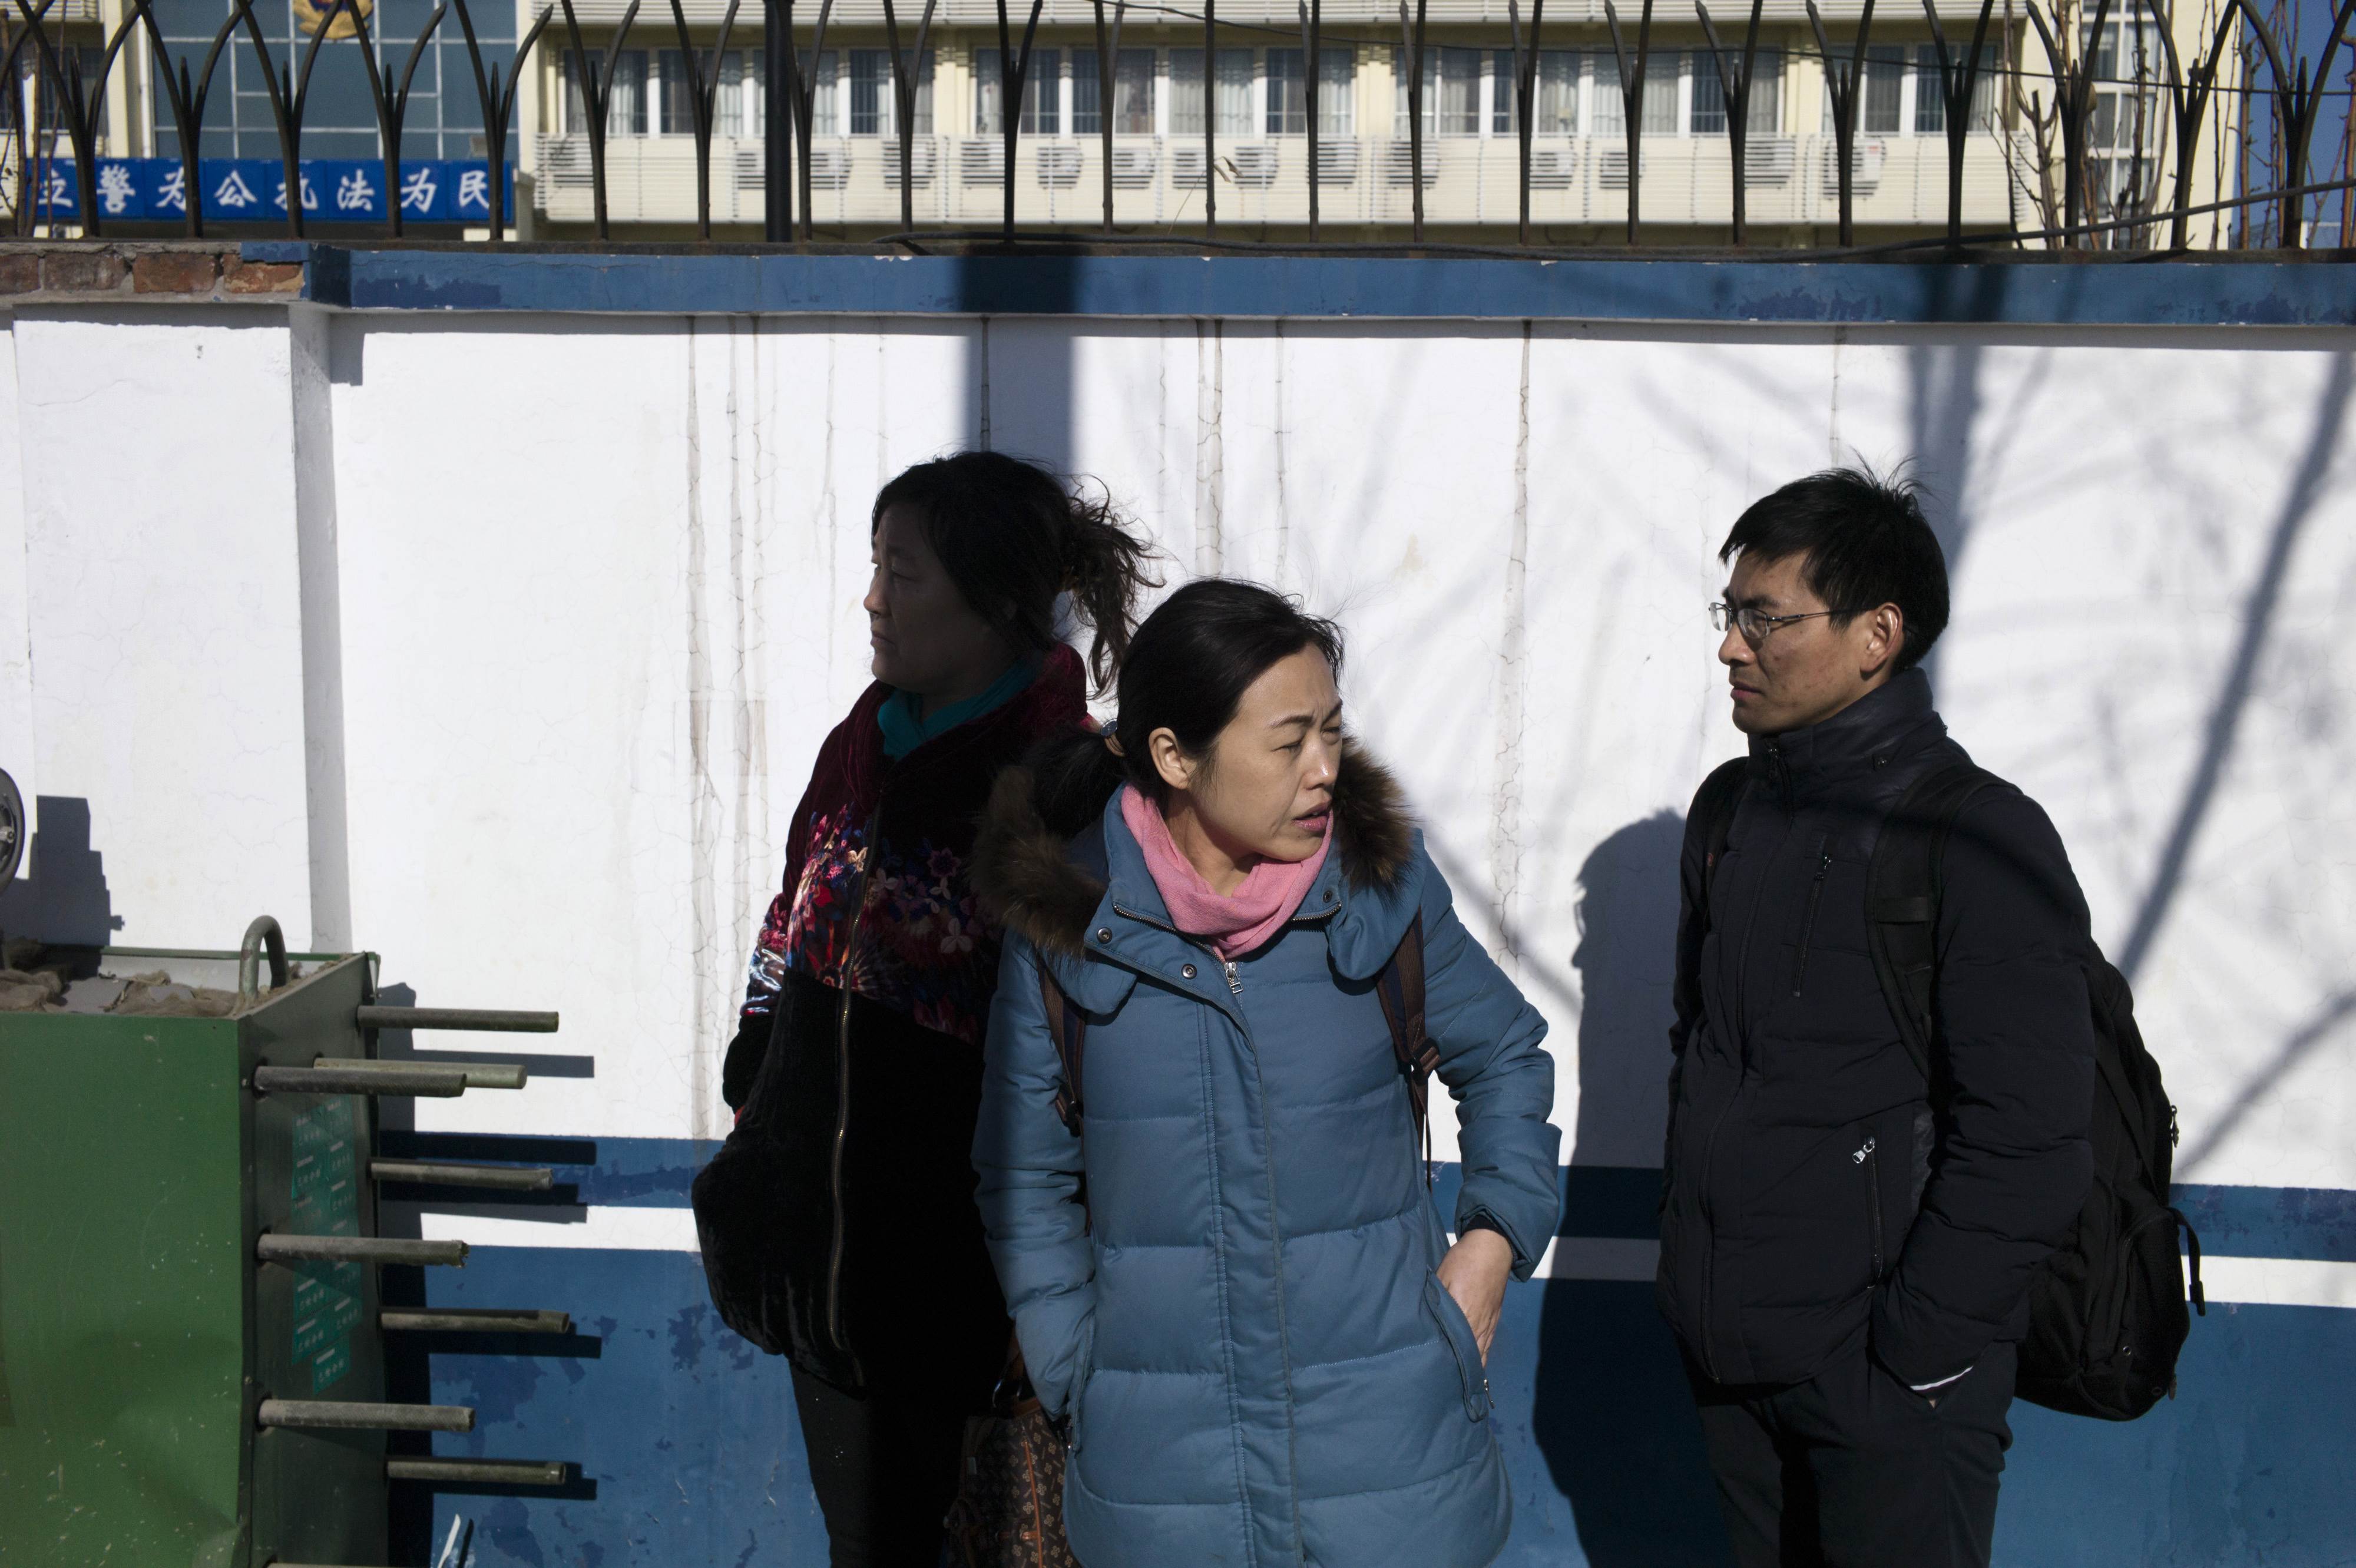 Family members and lawyers of detained lawyers and their colleagues gather after another attempt to seek answers at the Hexi District Detention Centre in Tianjin on January 8, 2016. Six months ago, China's biggest-ever crackdown on human rights lawyers saw state agents question more than 130 attorneys and their colleagues. AFP PHOTO / FRED DUFOUR